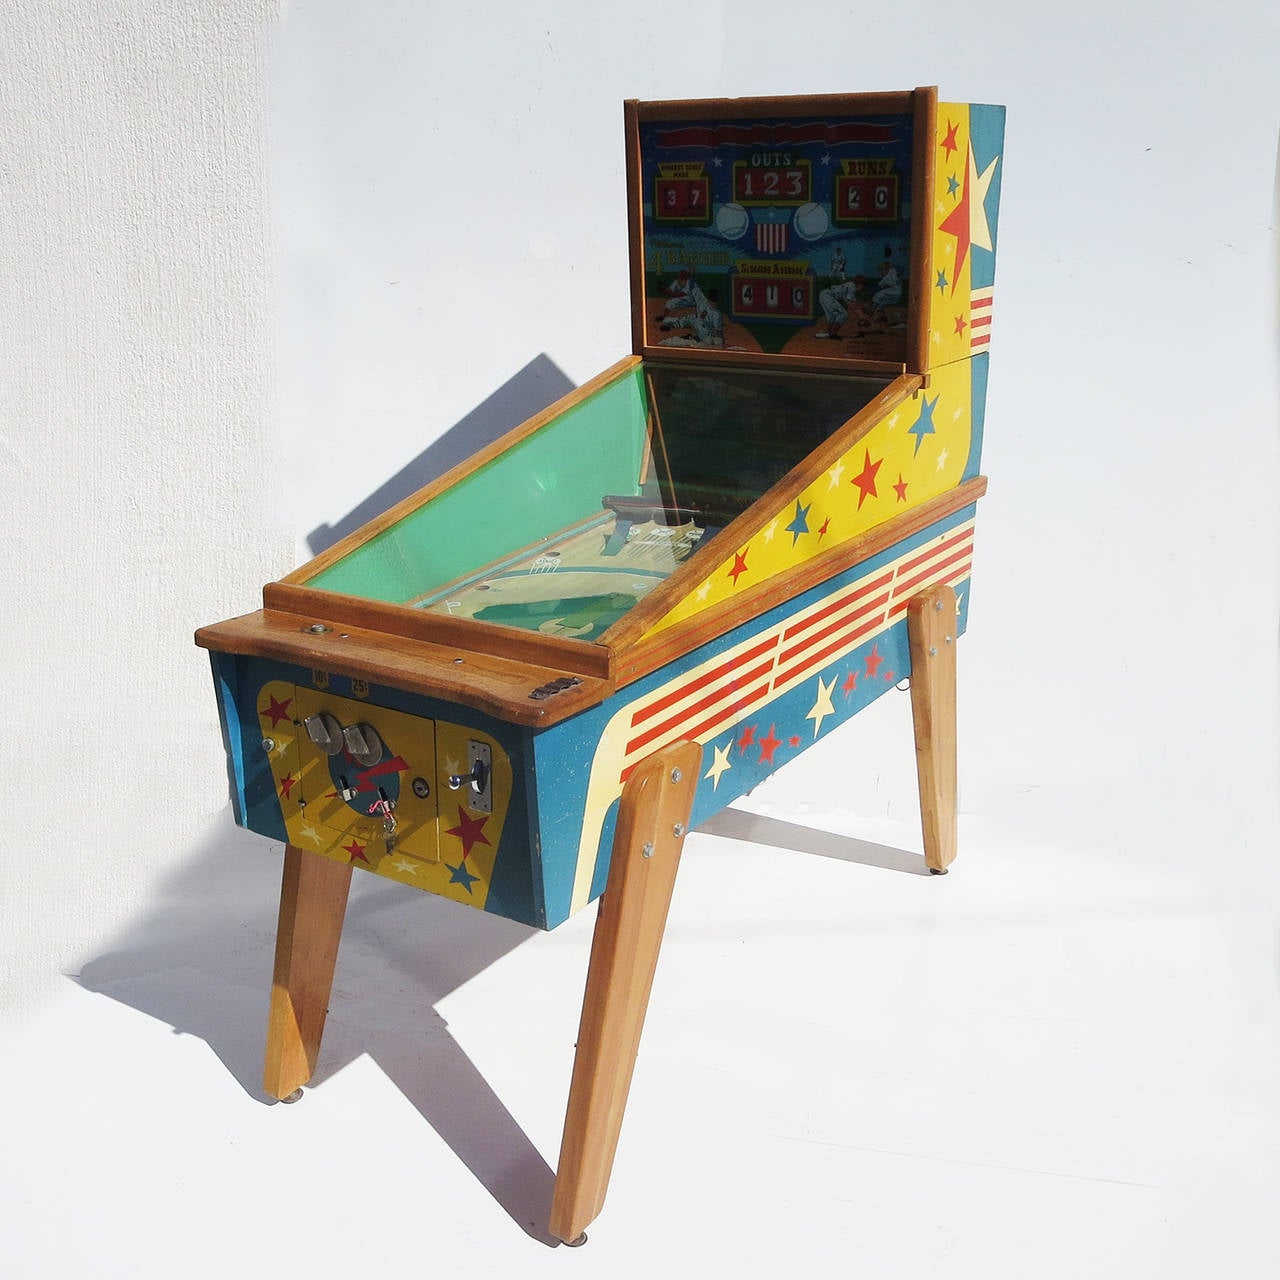 We have had a few baseball games over the years, but this one stands out as one of the best! The machine came from a private residence, where it has spent its life, rather than being beat on daily in an arcade. The cabinet paint is all original,